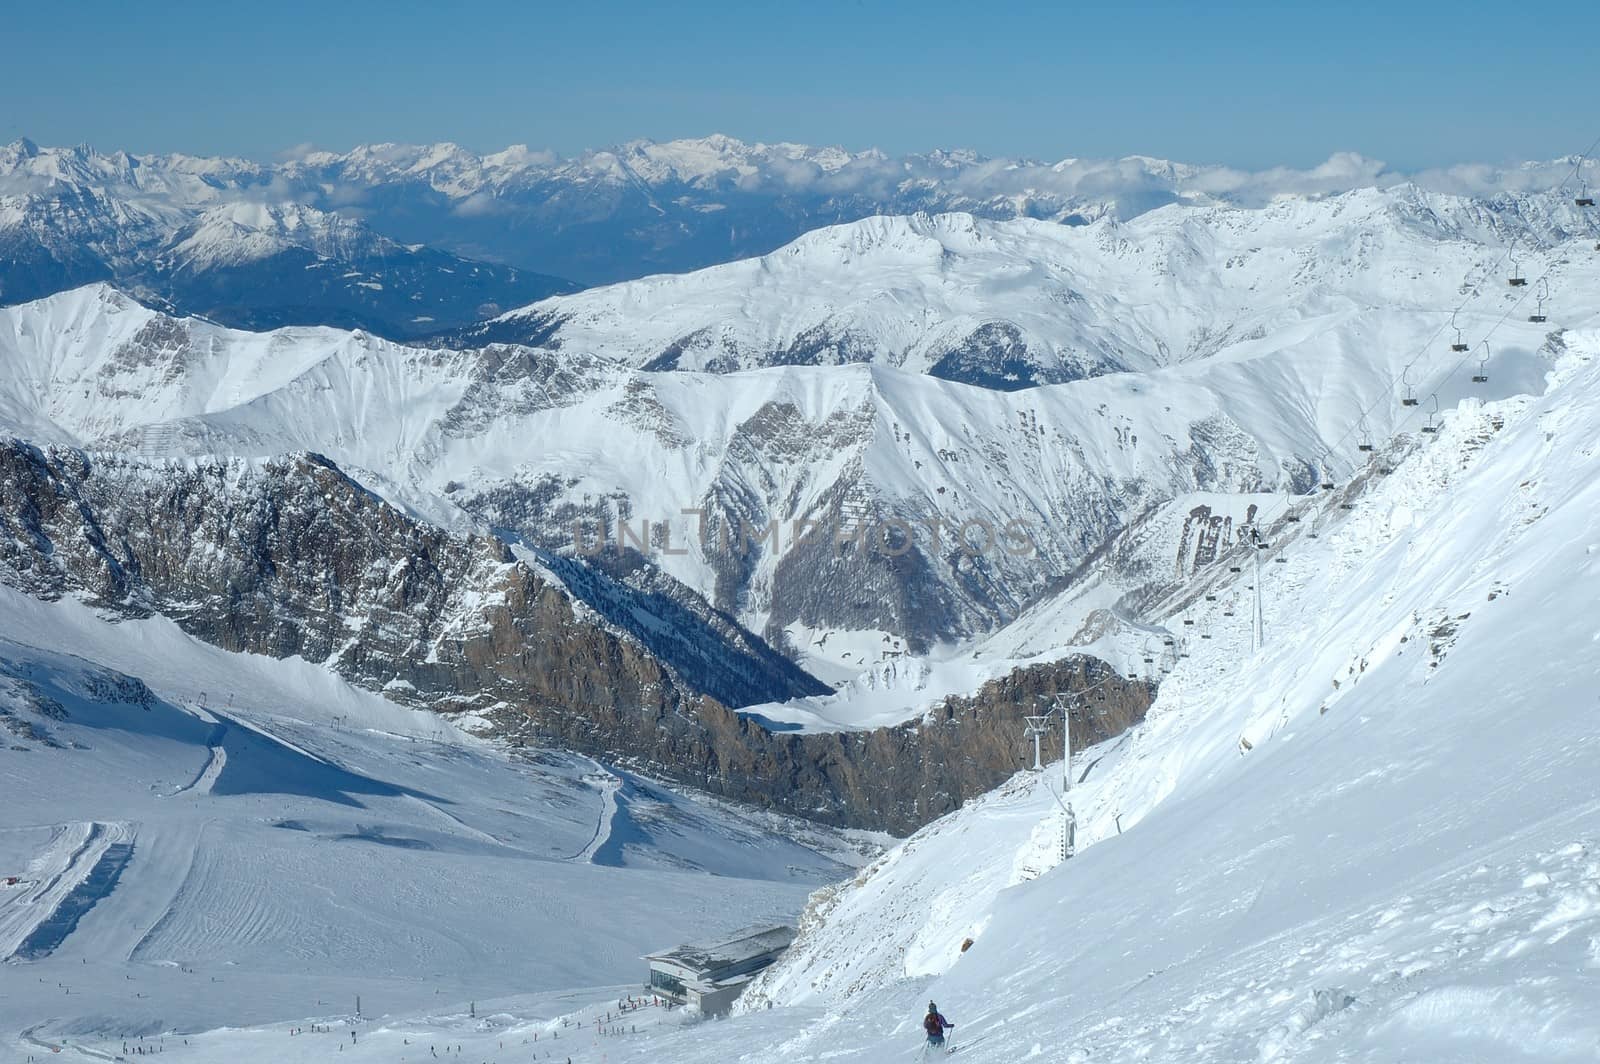 Ski slopes and ski lift on Hintertux glacier in Alps nearby Zillertal valley in Austria